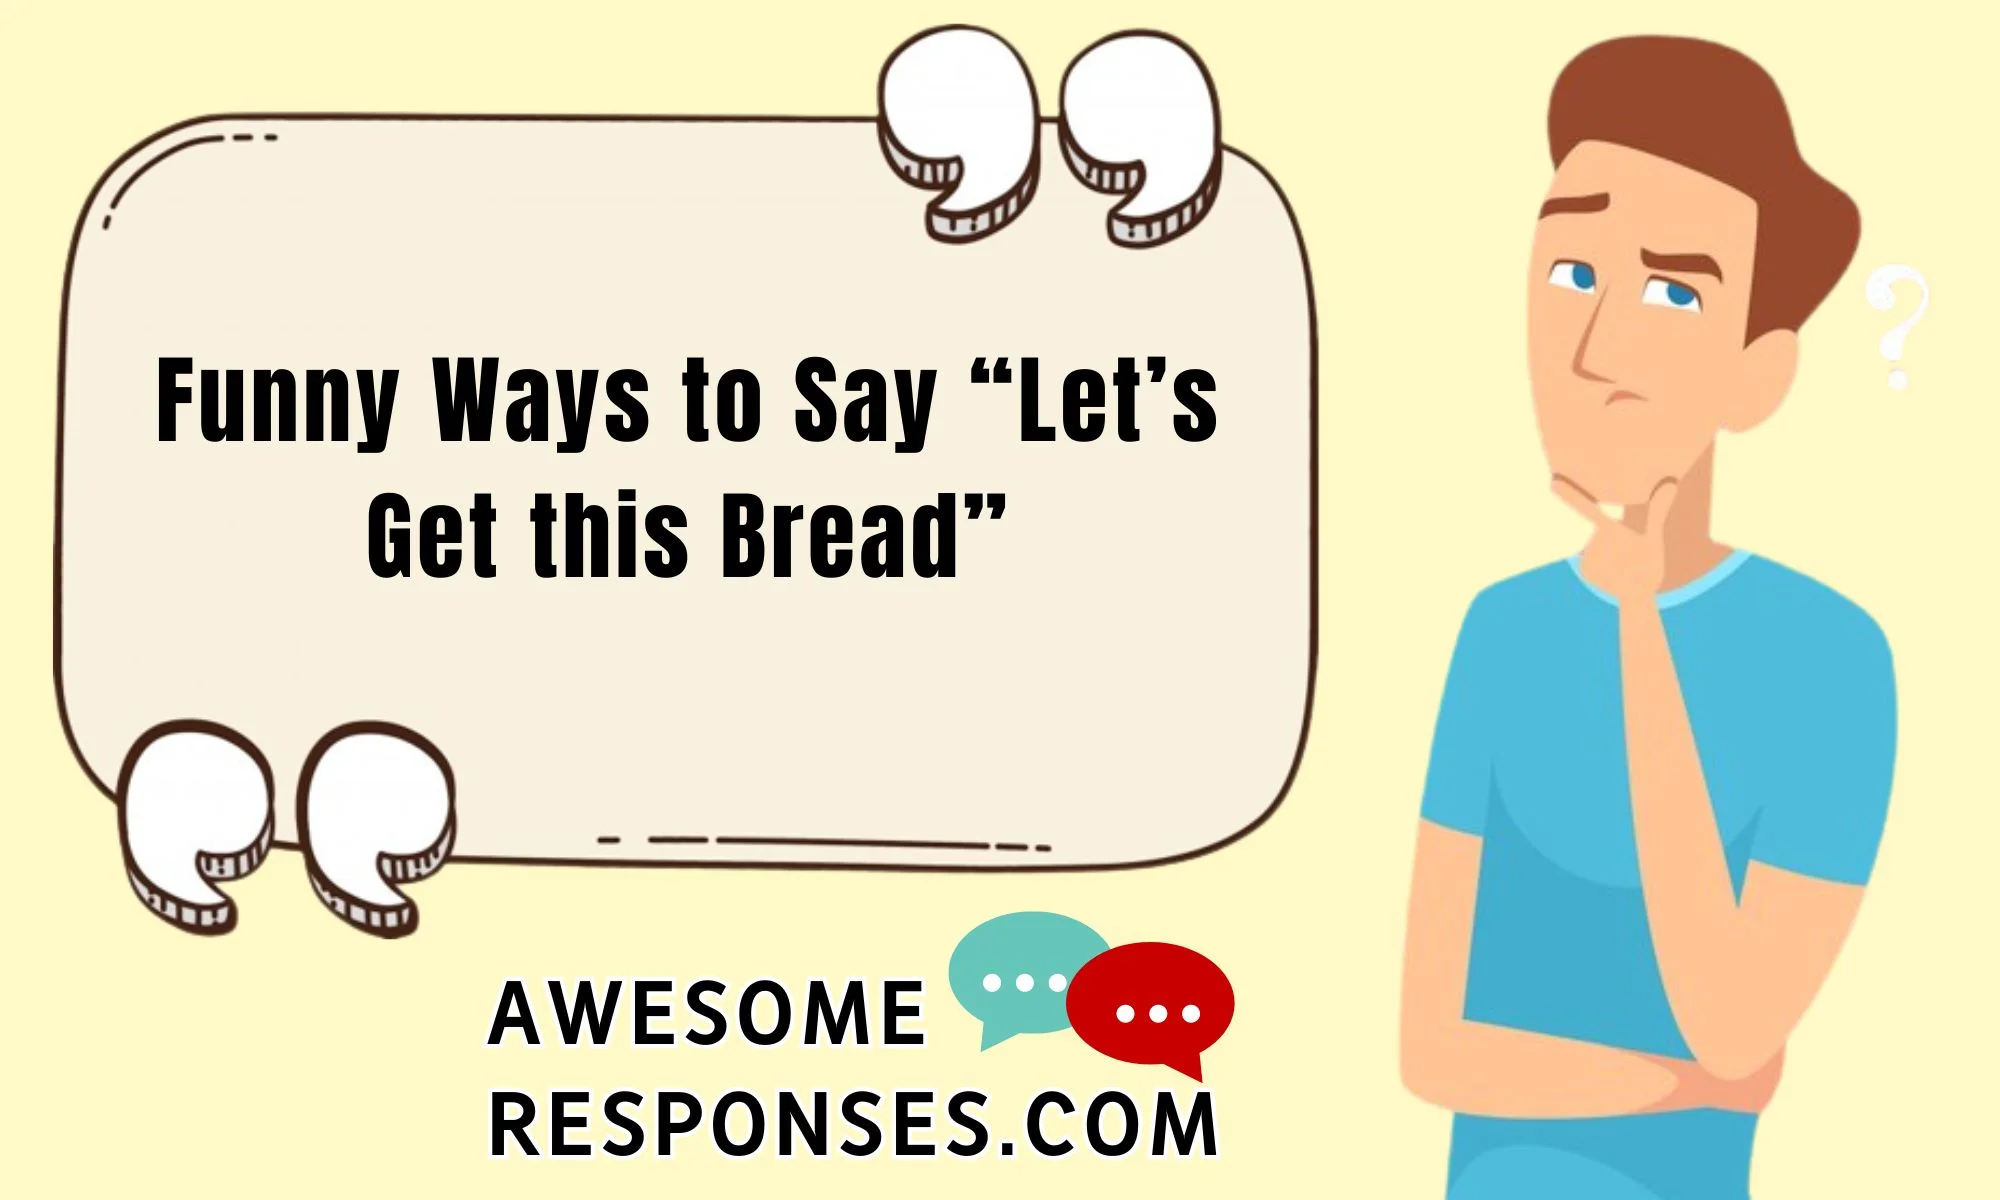 Funny Ways to Say “Let’s Get this Bread”